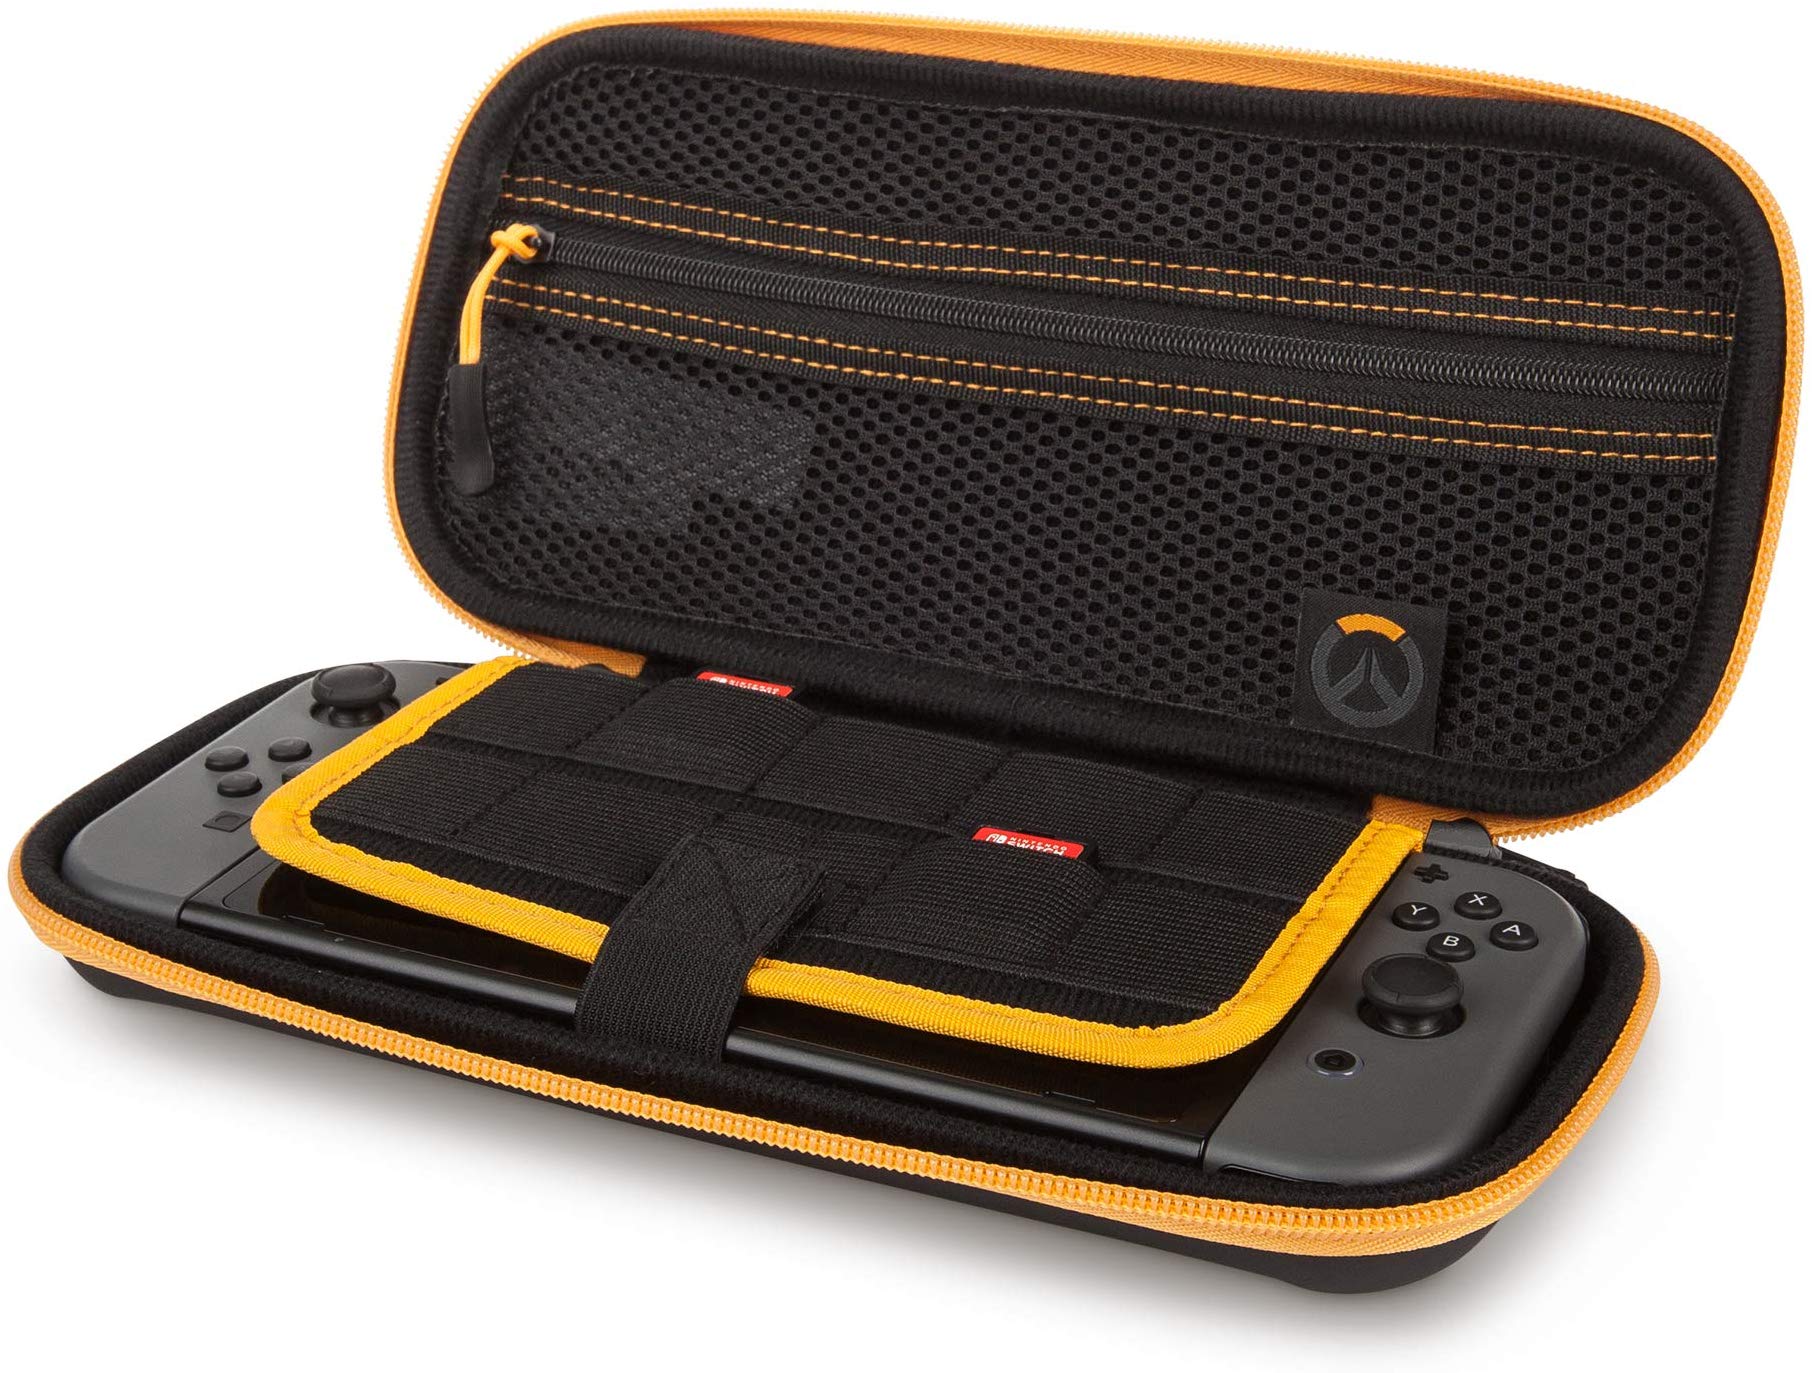 Fans Spot Overwatch Themed Nintendo Switch Case Listed On Amazon Dot Esports